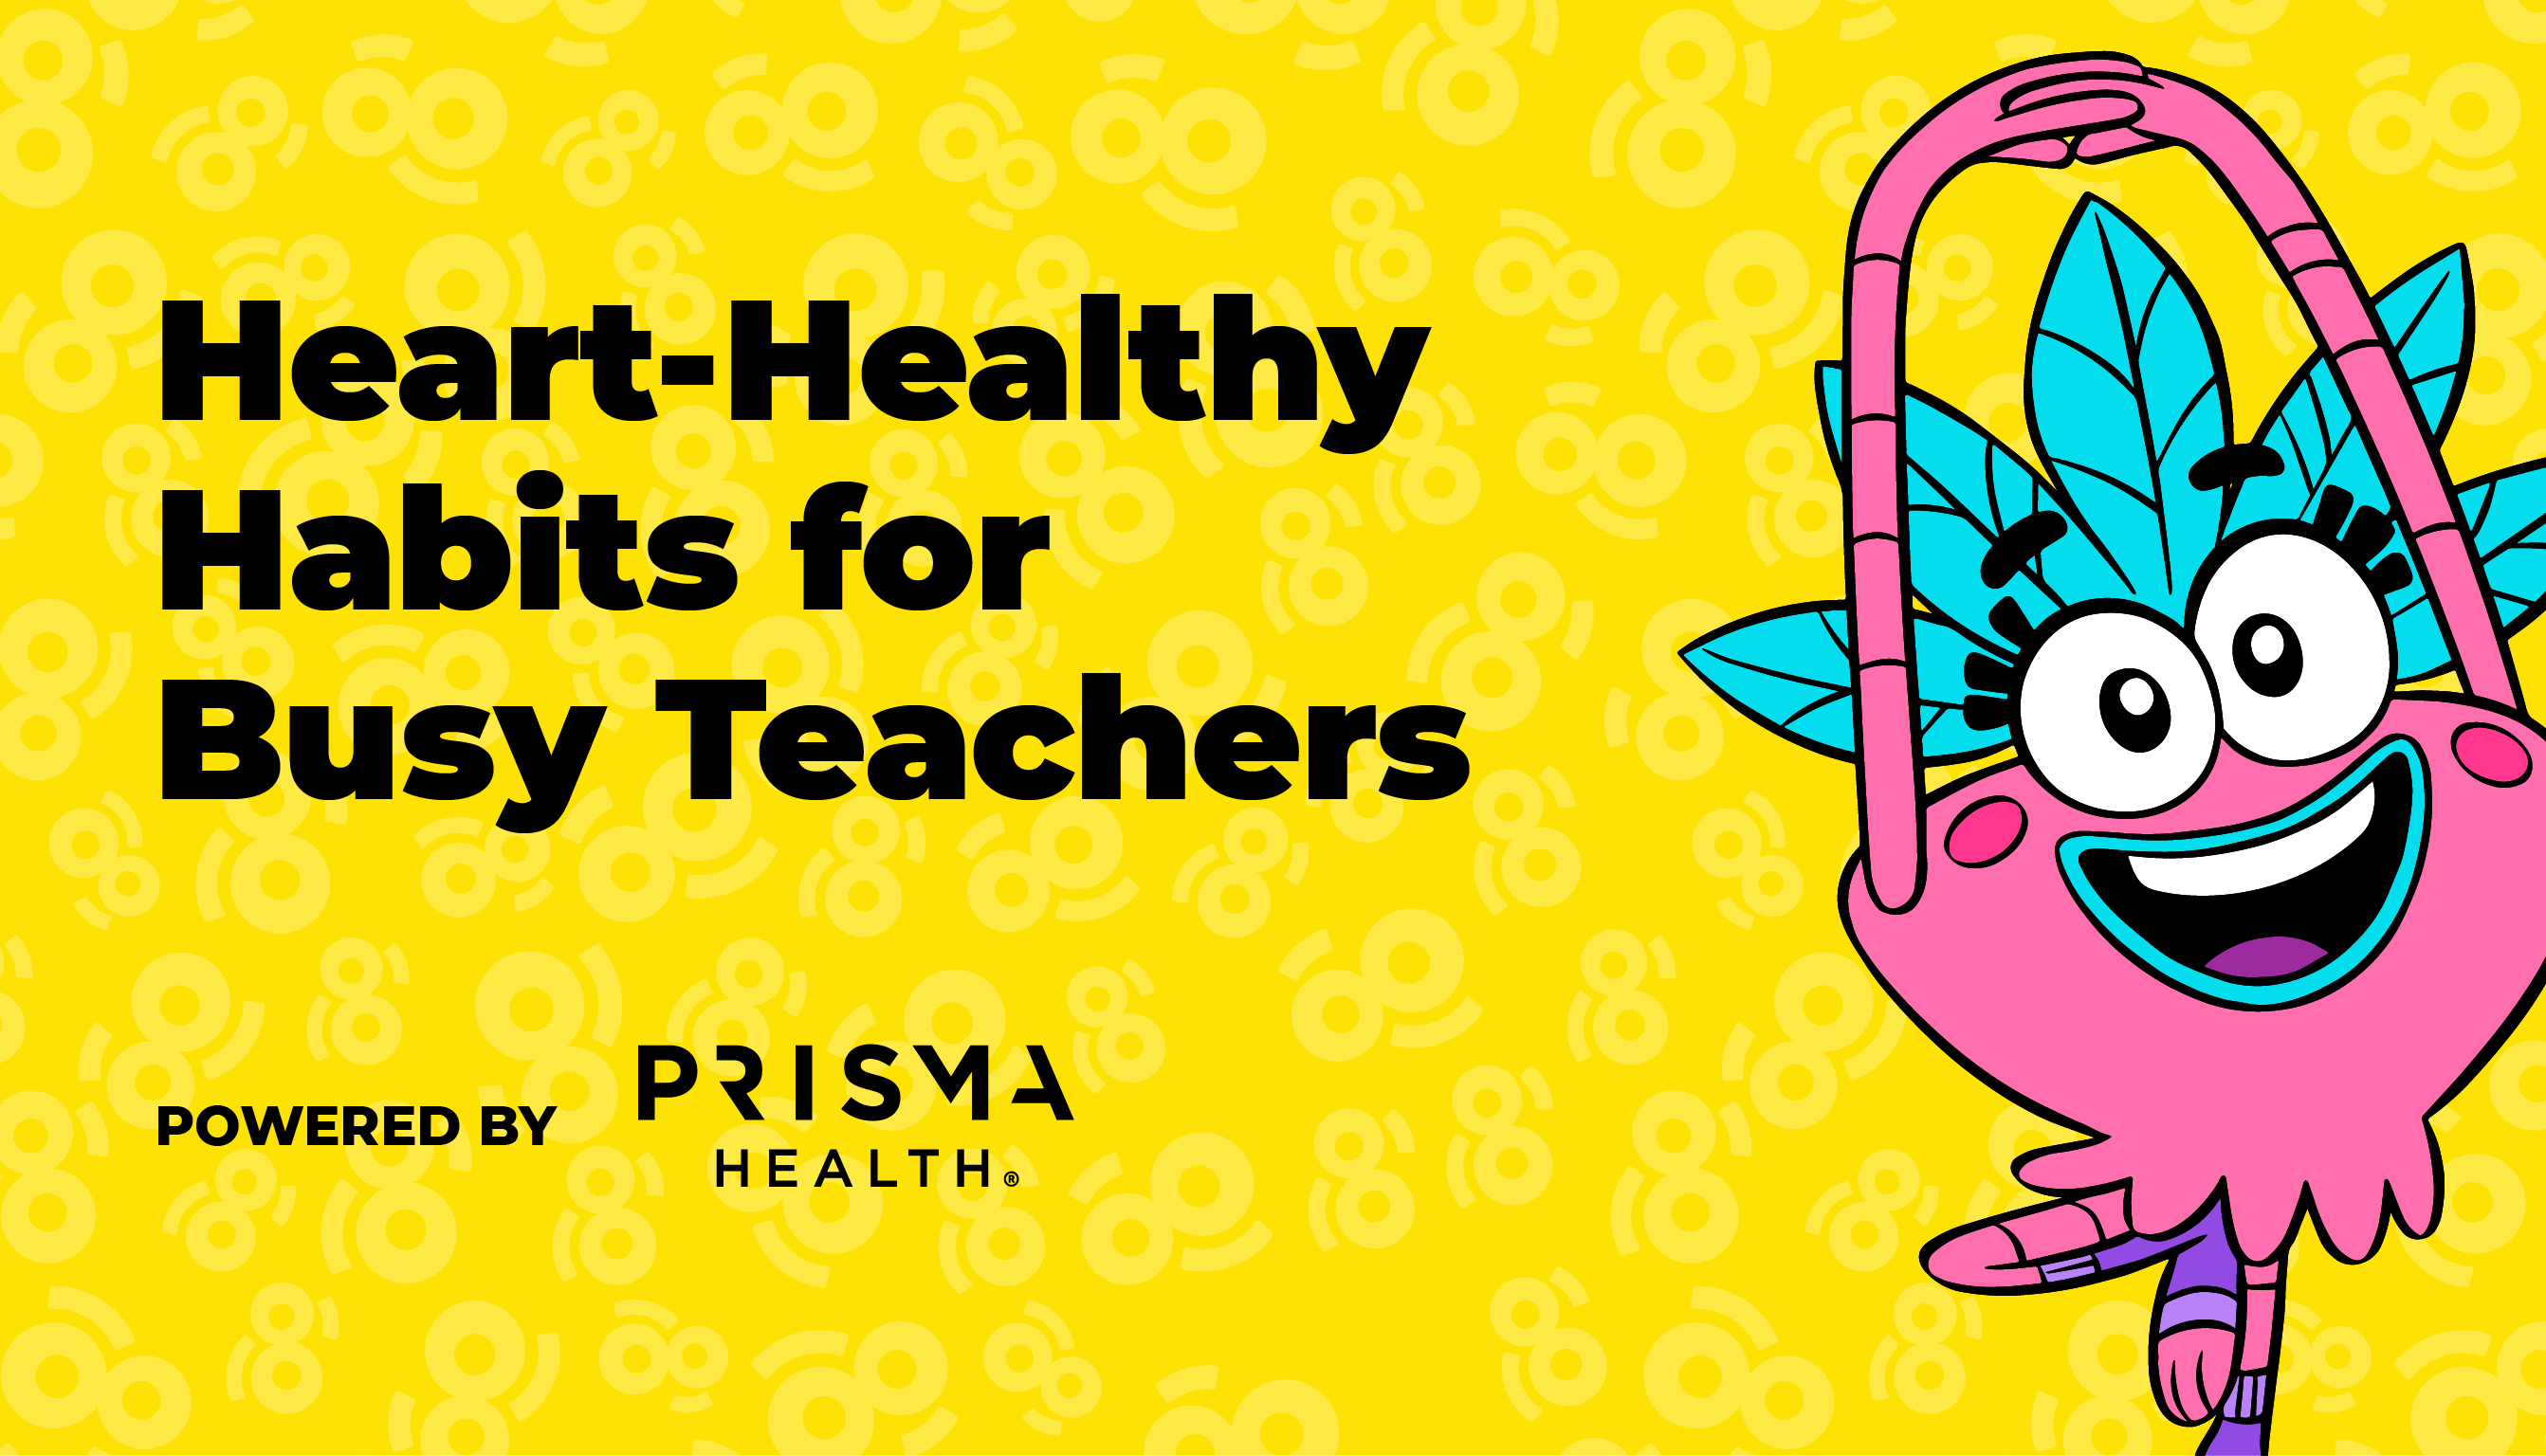 Heart-Healthy Habits for Busy Teachers: Tips for Incorporating Wellness into Your Daily GoNoodle Routine